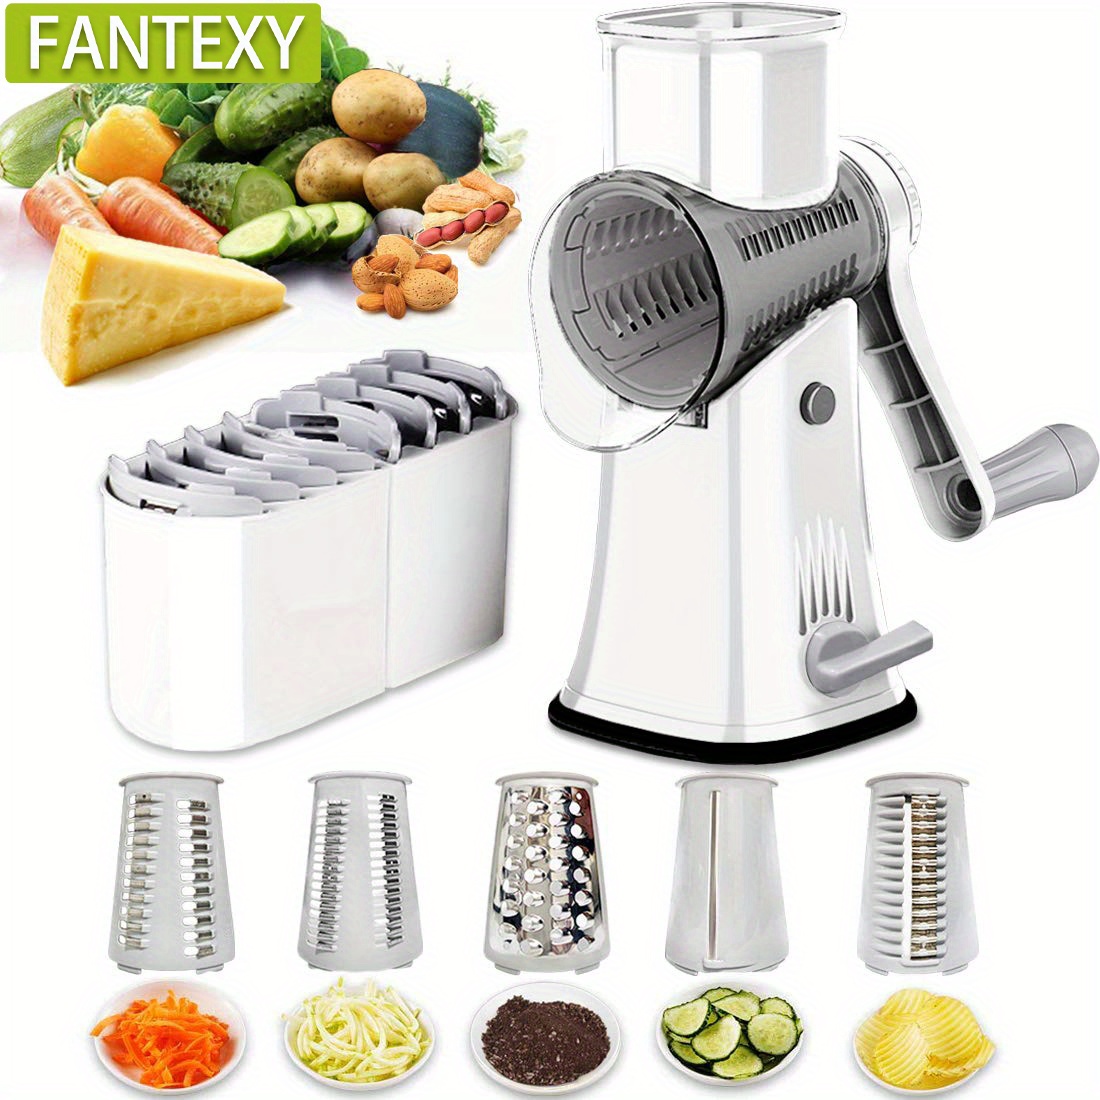 VEKAYA Rotary Cheese Grater, 5 in 1 Cheese Grater with Handle